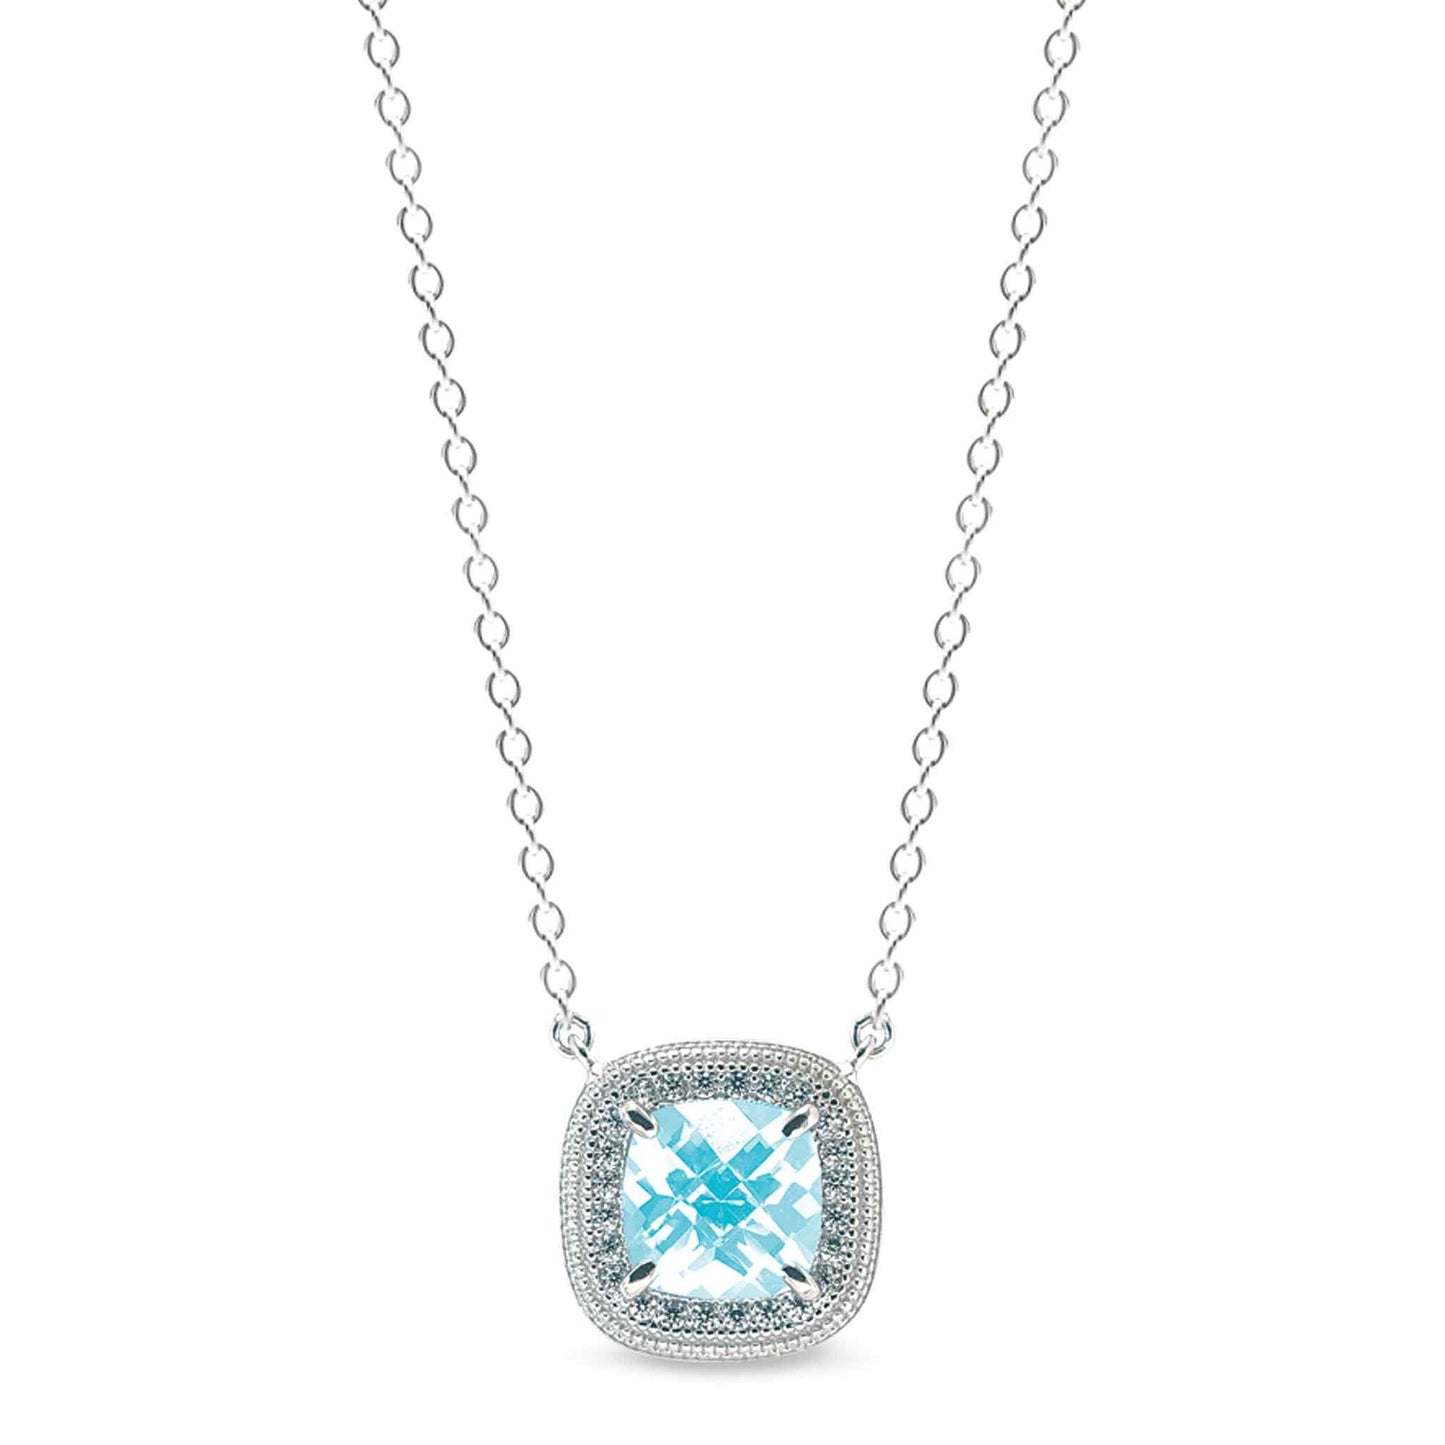 A necklace with simulated aquamarine & diamonds displayed on a neutral white background.